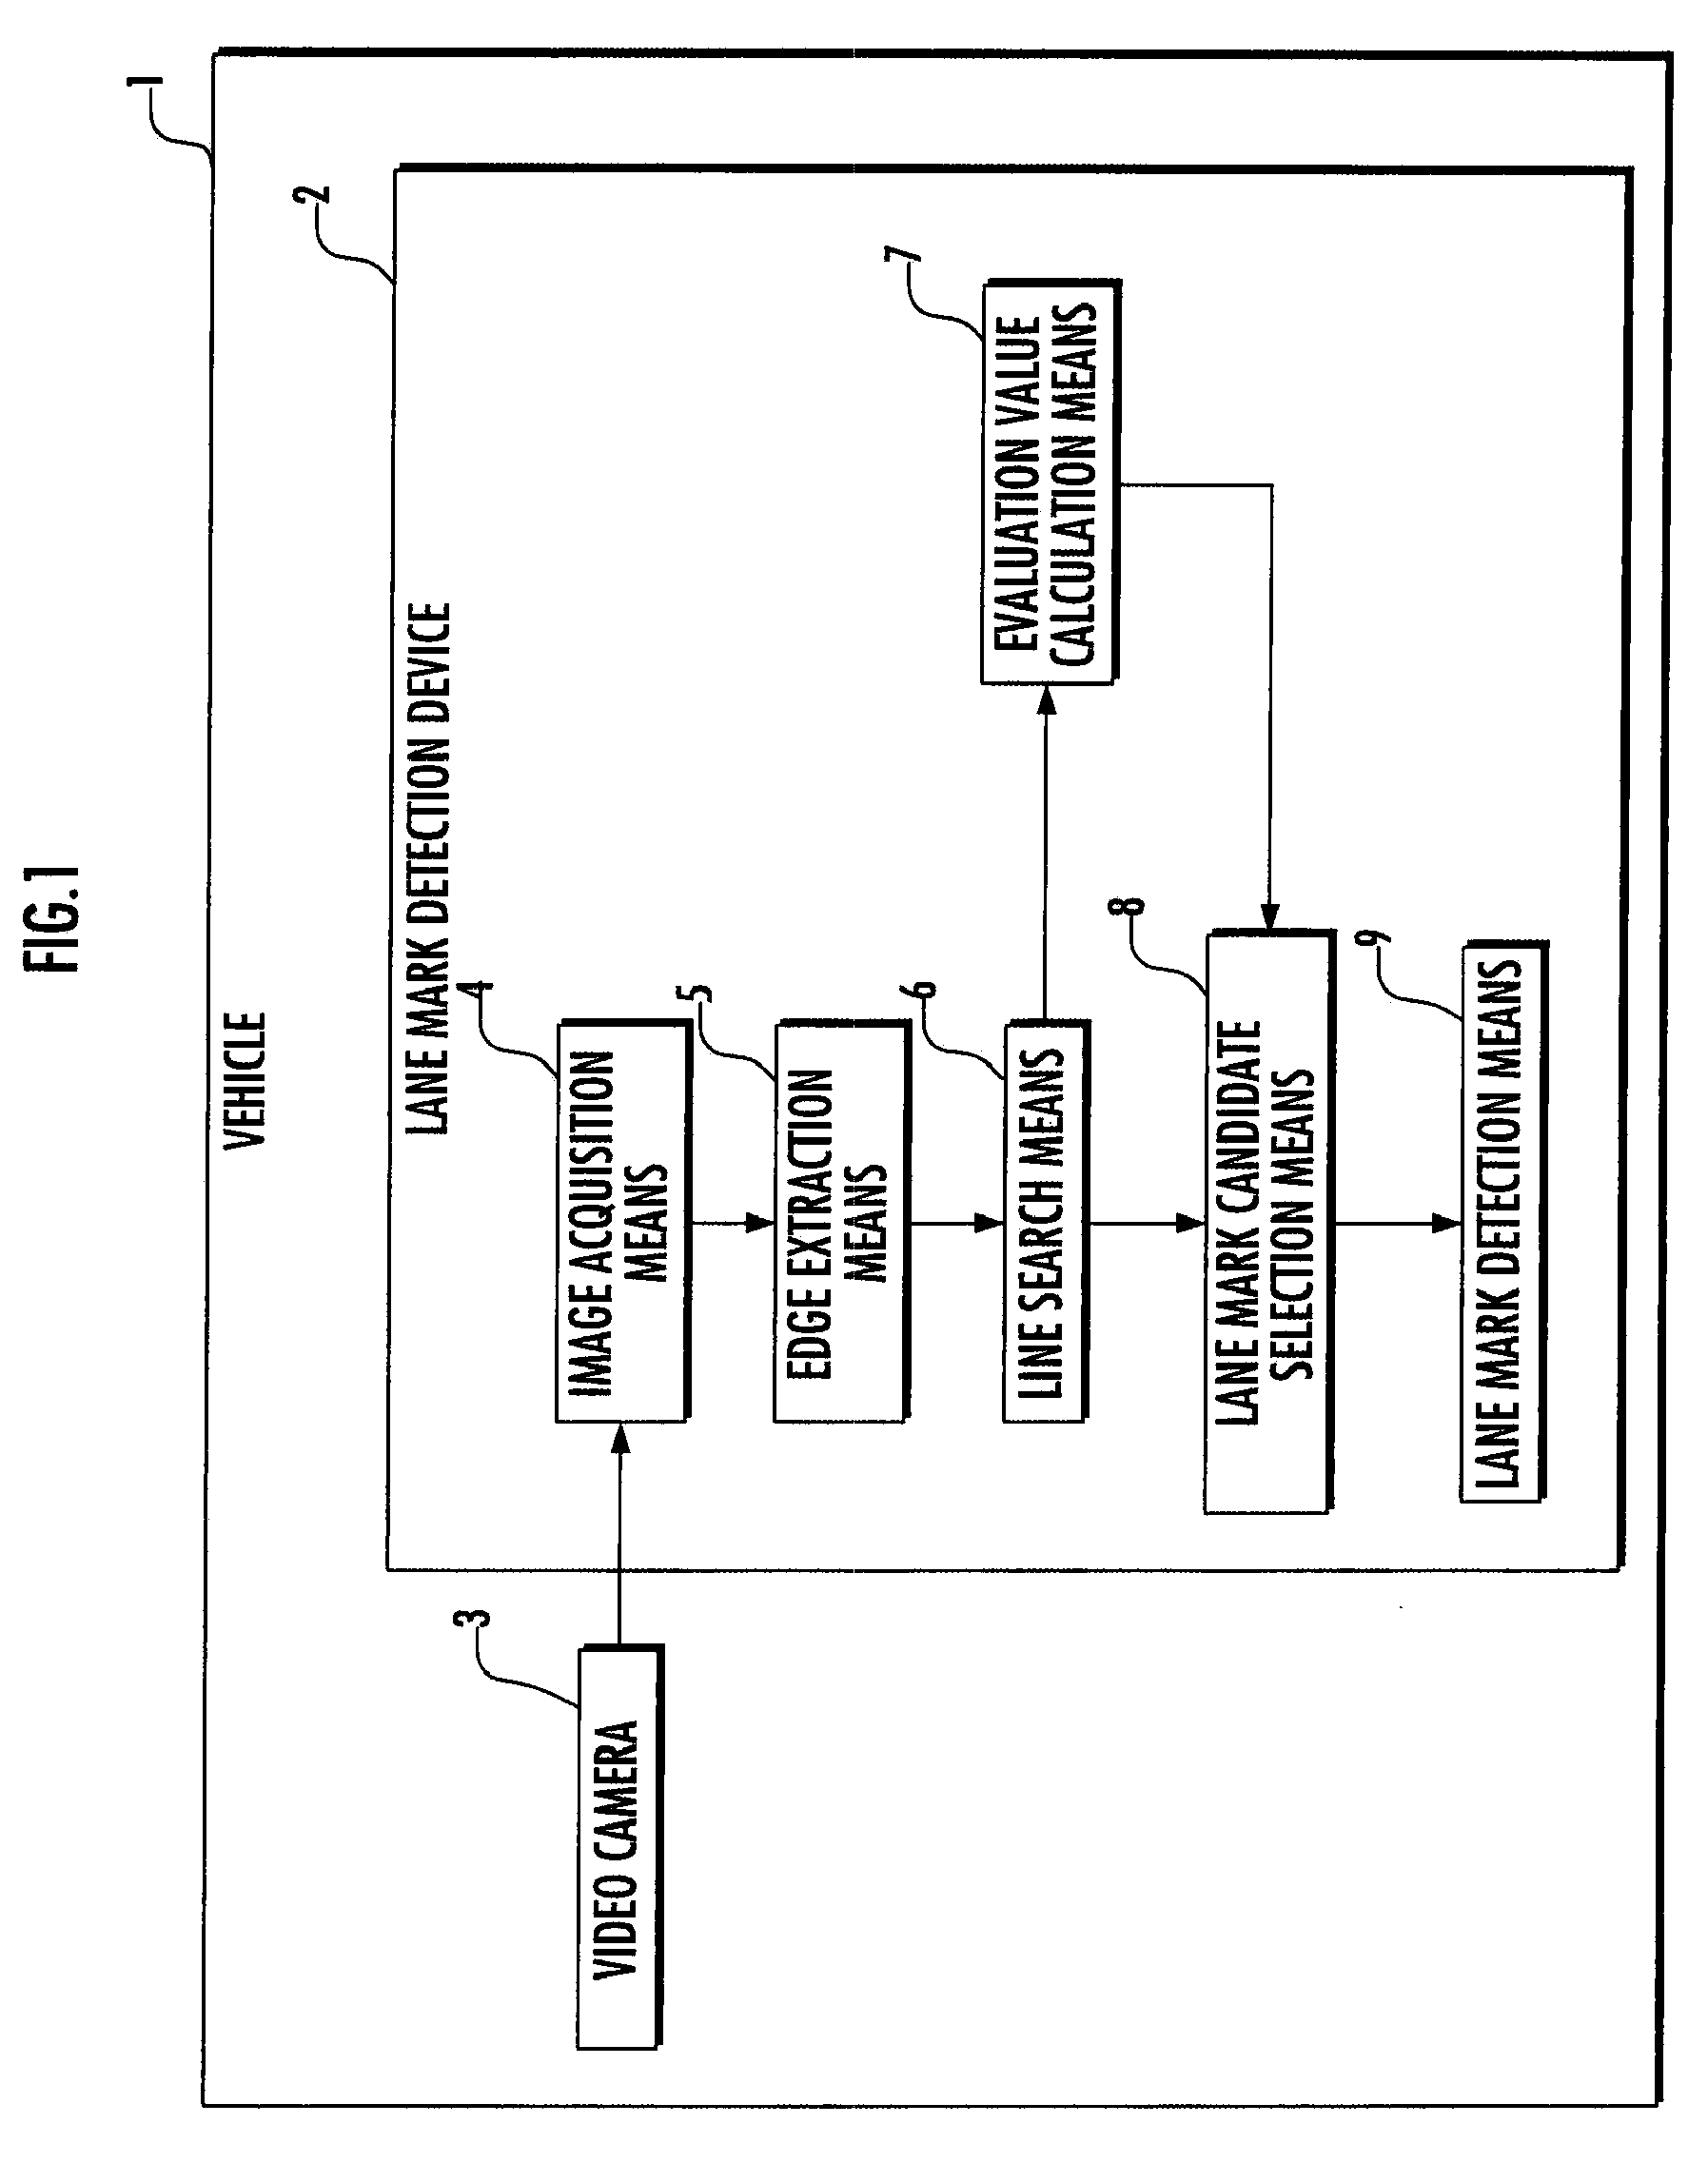 Vehicle and lane mark detection device